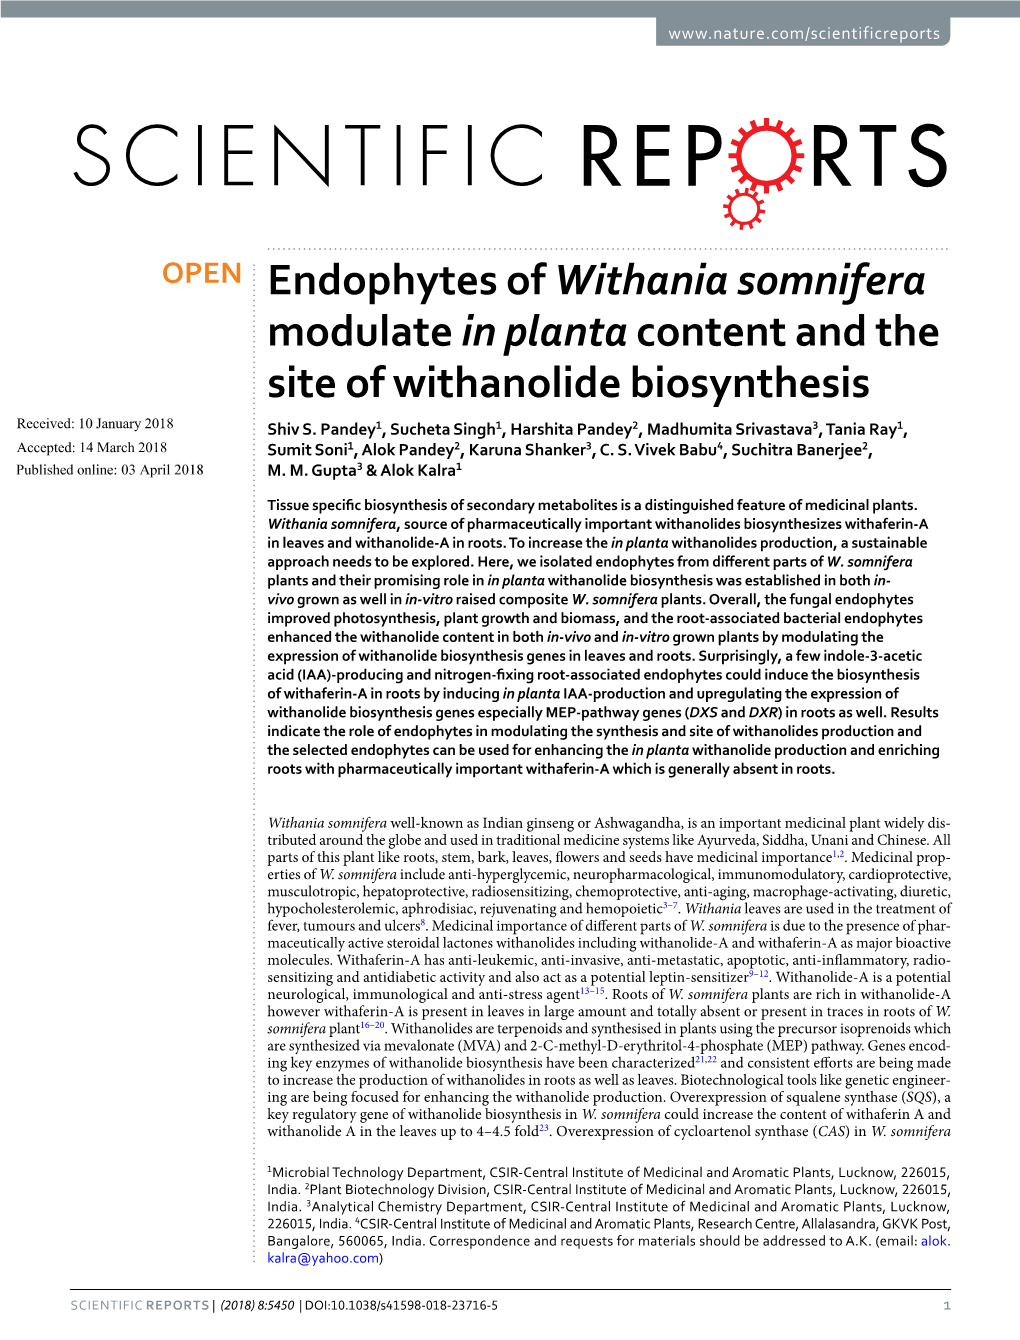 Endophytes of Withania Somnifera Modulate in Planta Content and the Site of Withanolide Biosynthesis Received: 10 January 2018 Shiv S